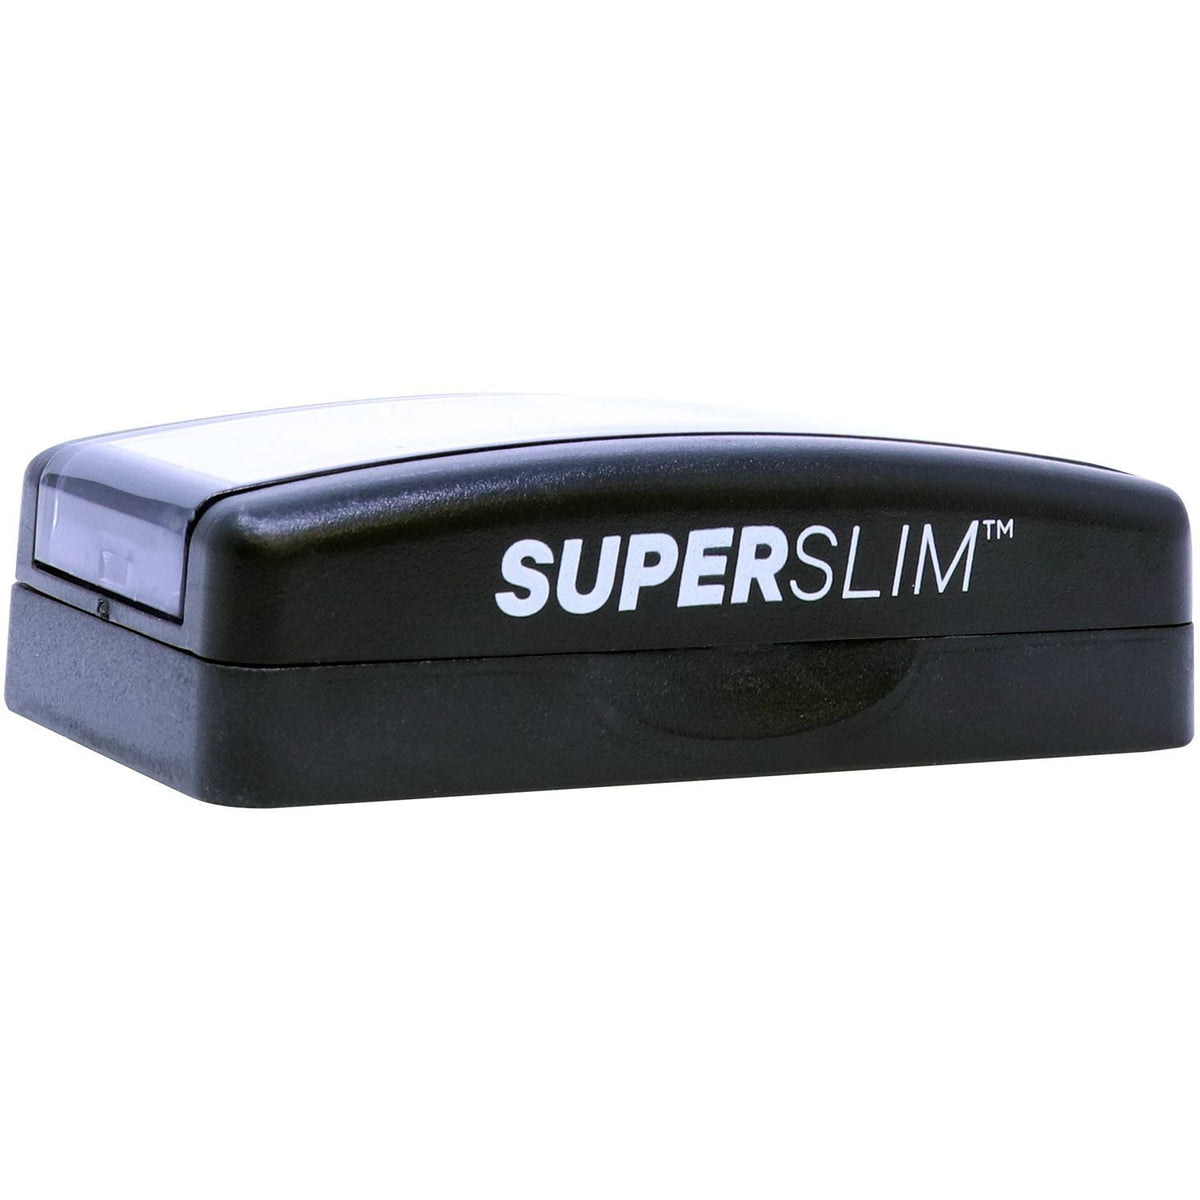 Superslim Stamp 2054 Front Angle